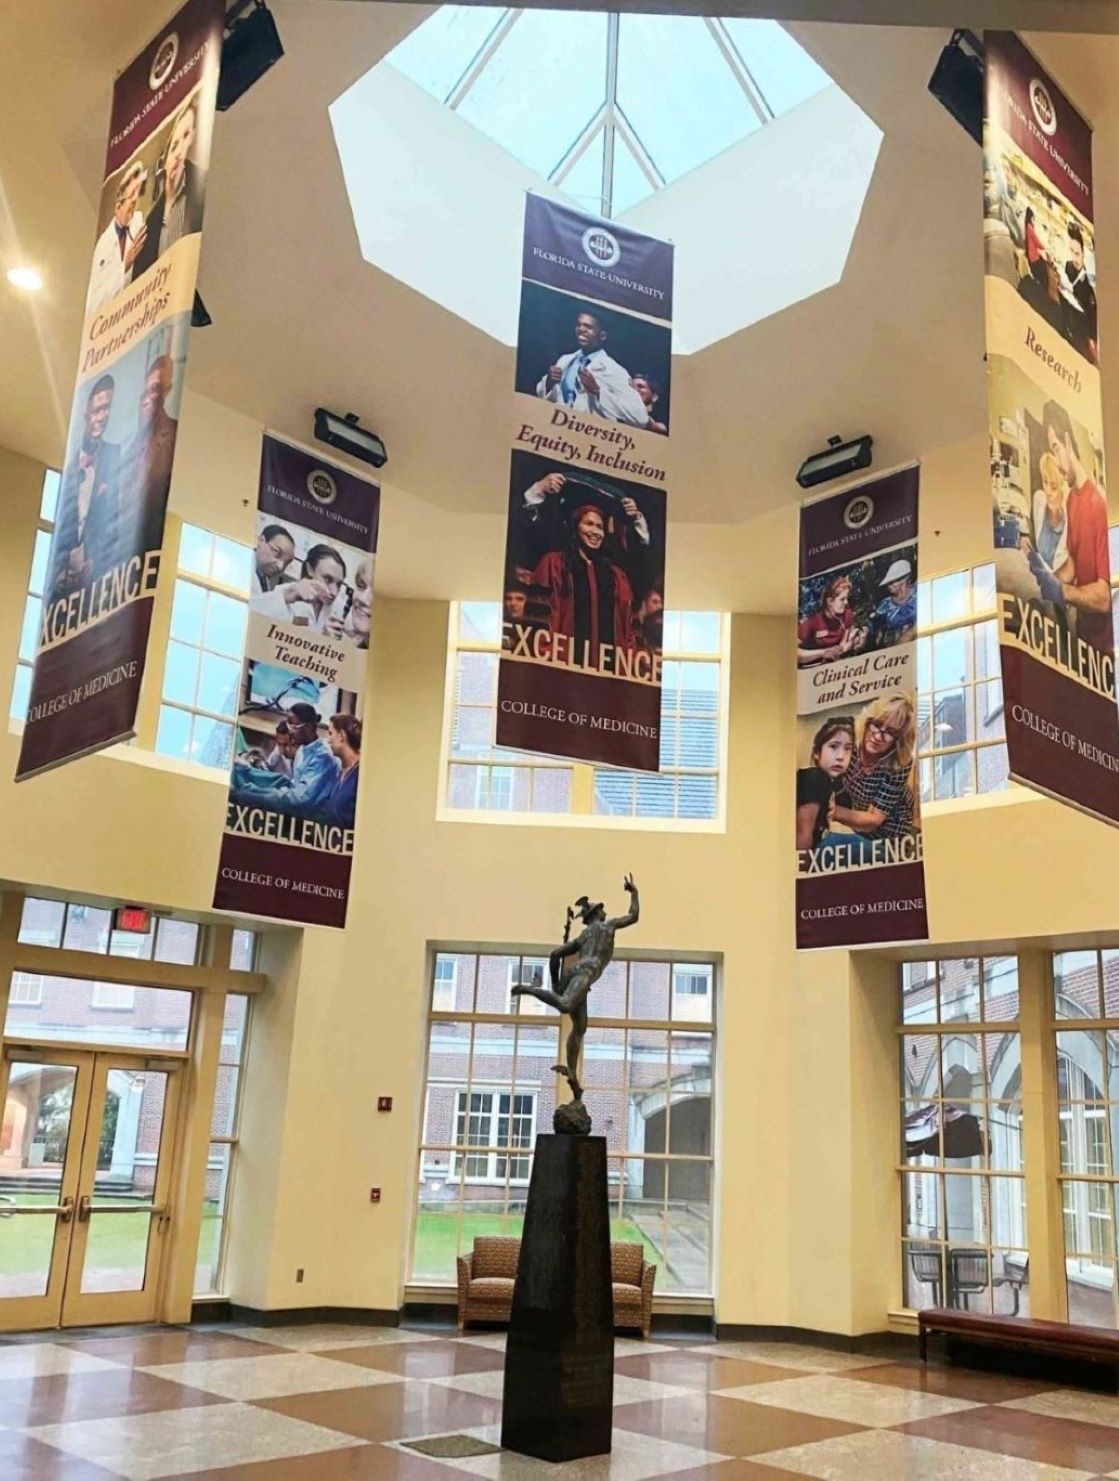 The College of Medicine's five pillars of excellence hang in the atrium.